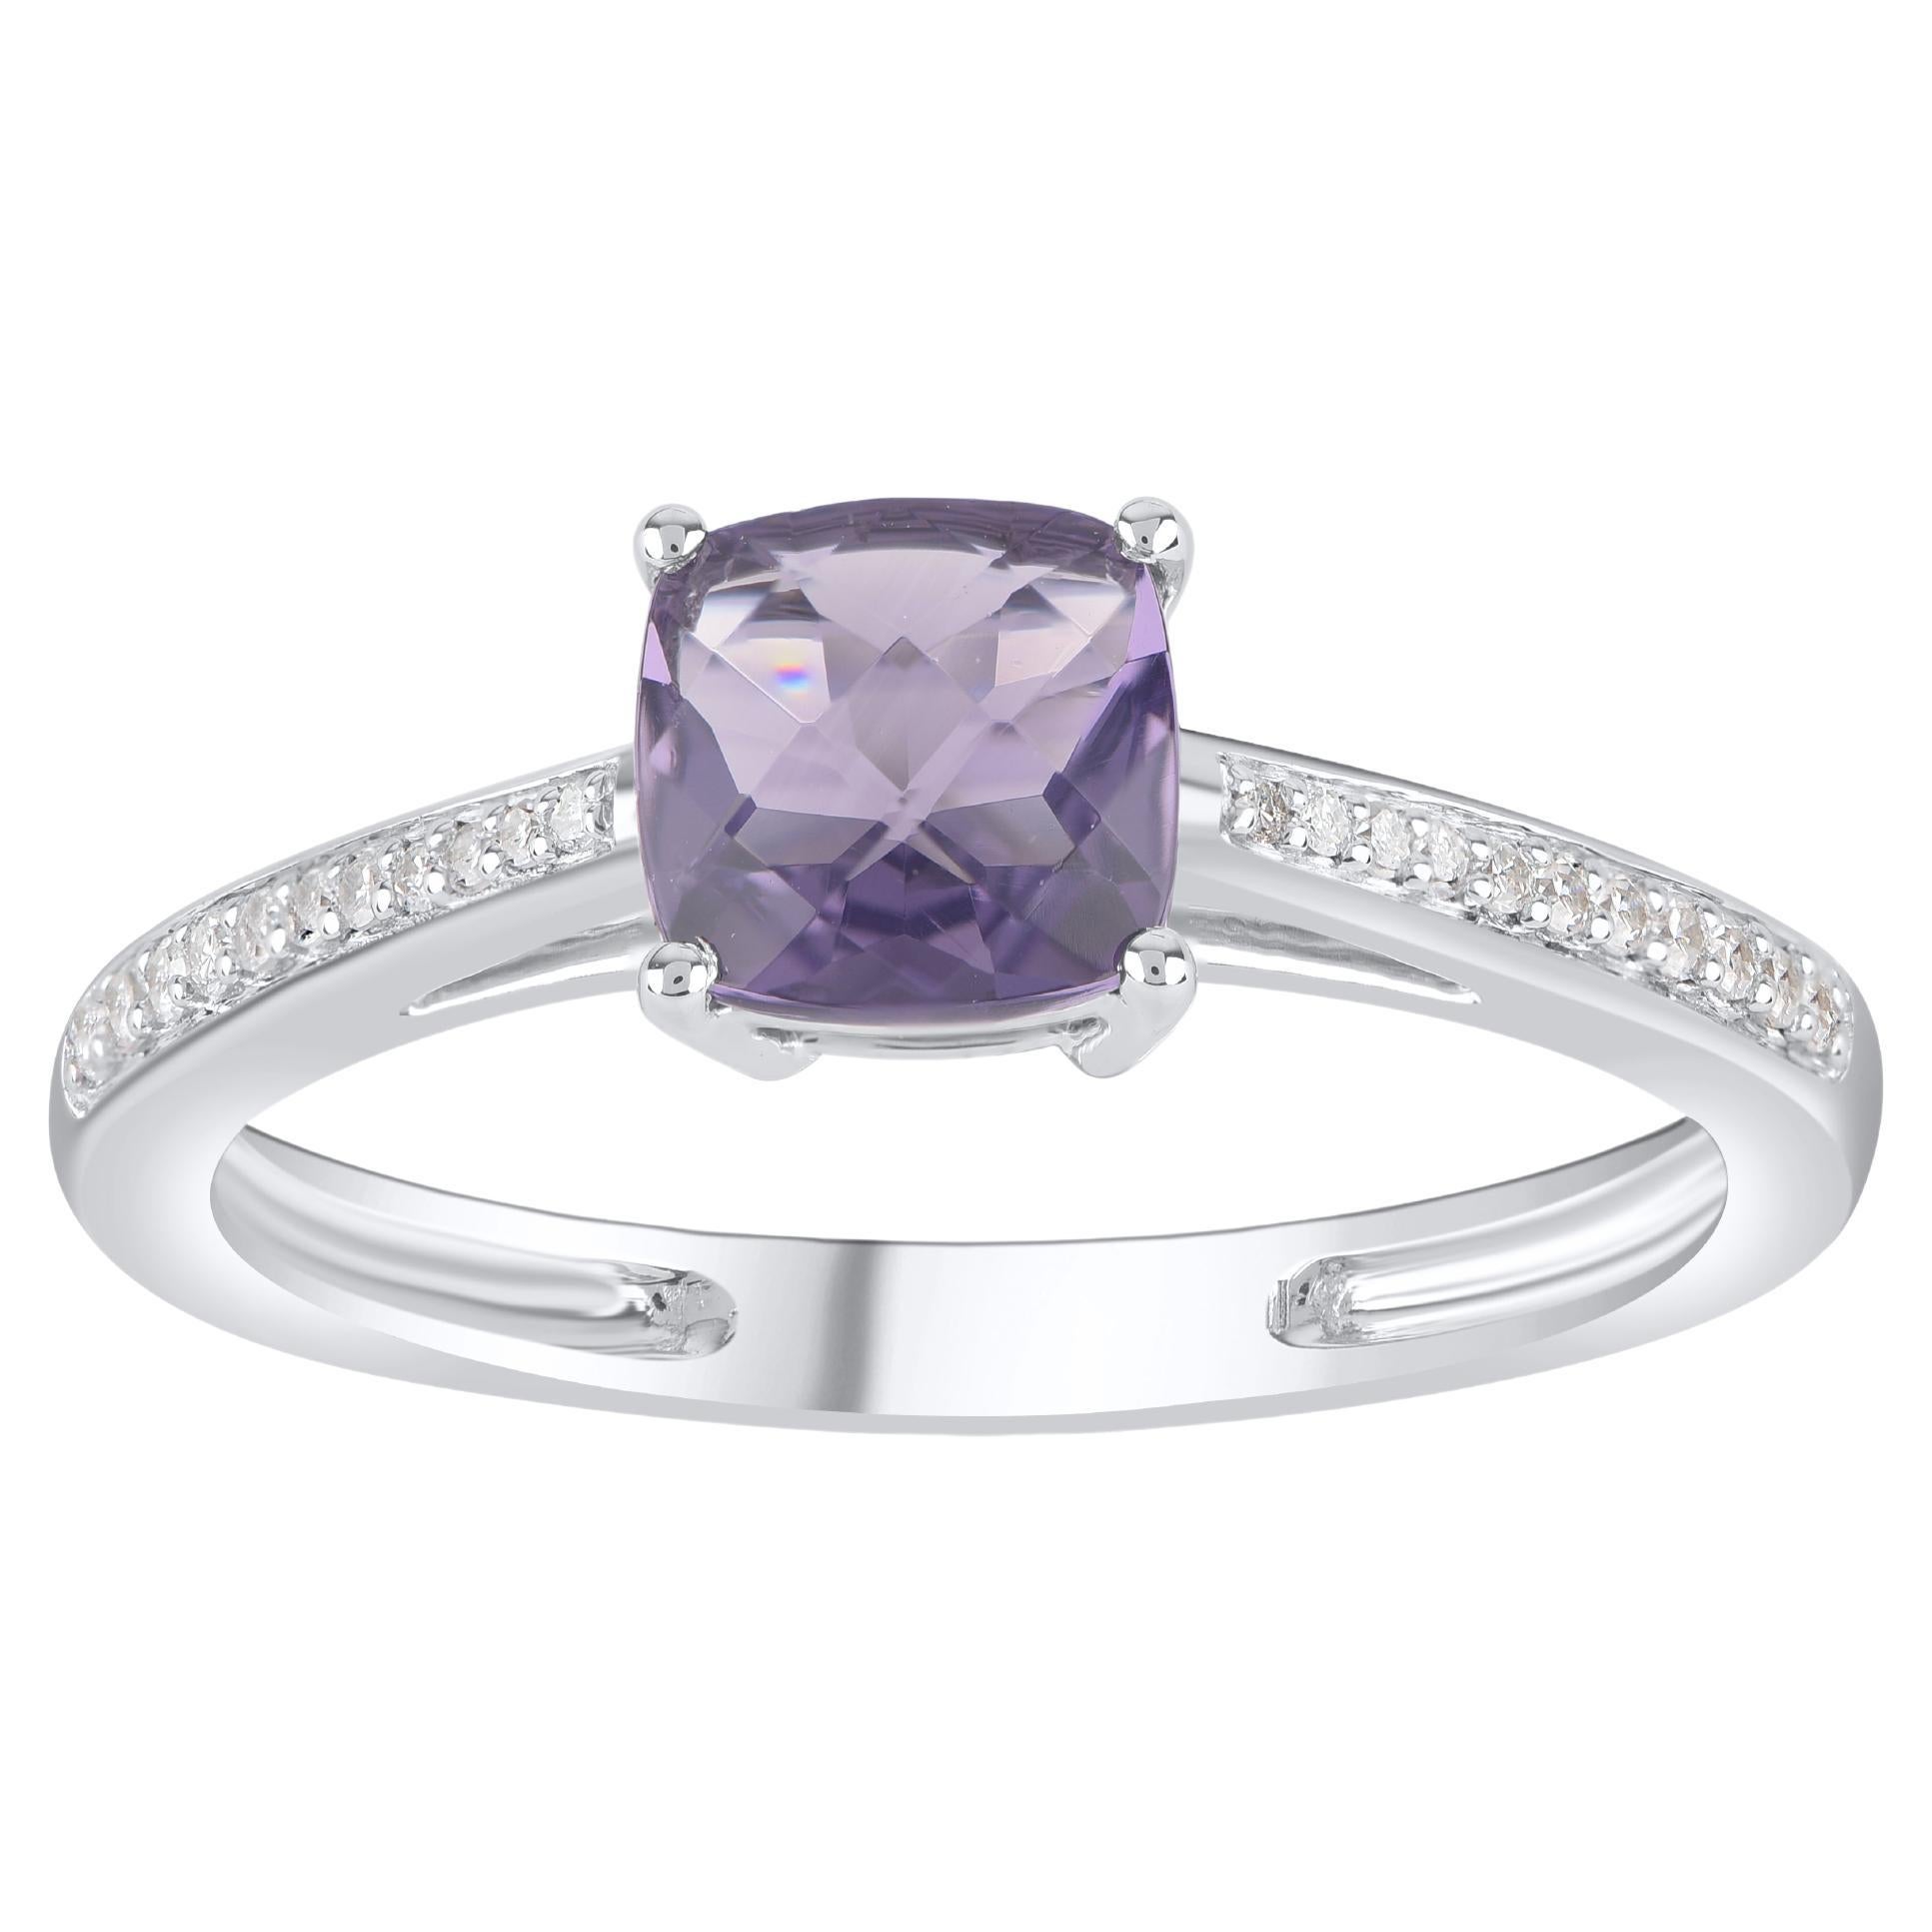 TJD 0.85 Carat Round & Cushion Cut Amethyst 14 Karat White Gold Solitaire Ring For Sale